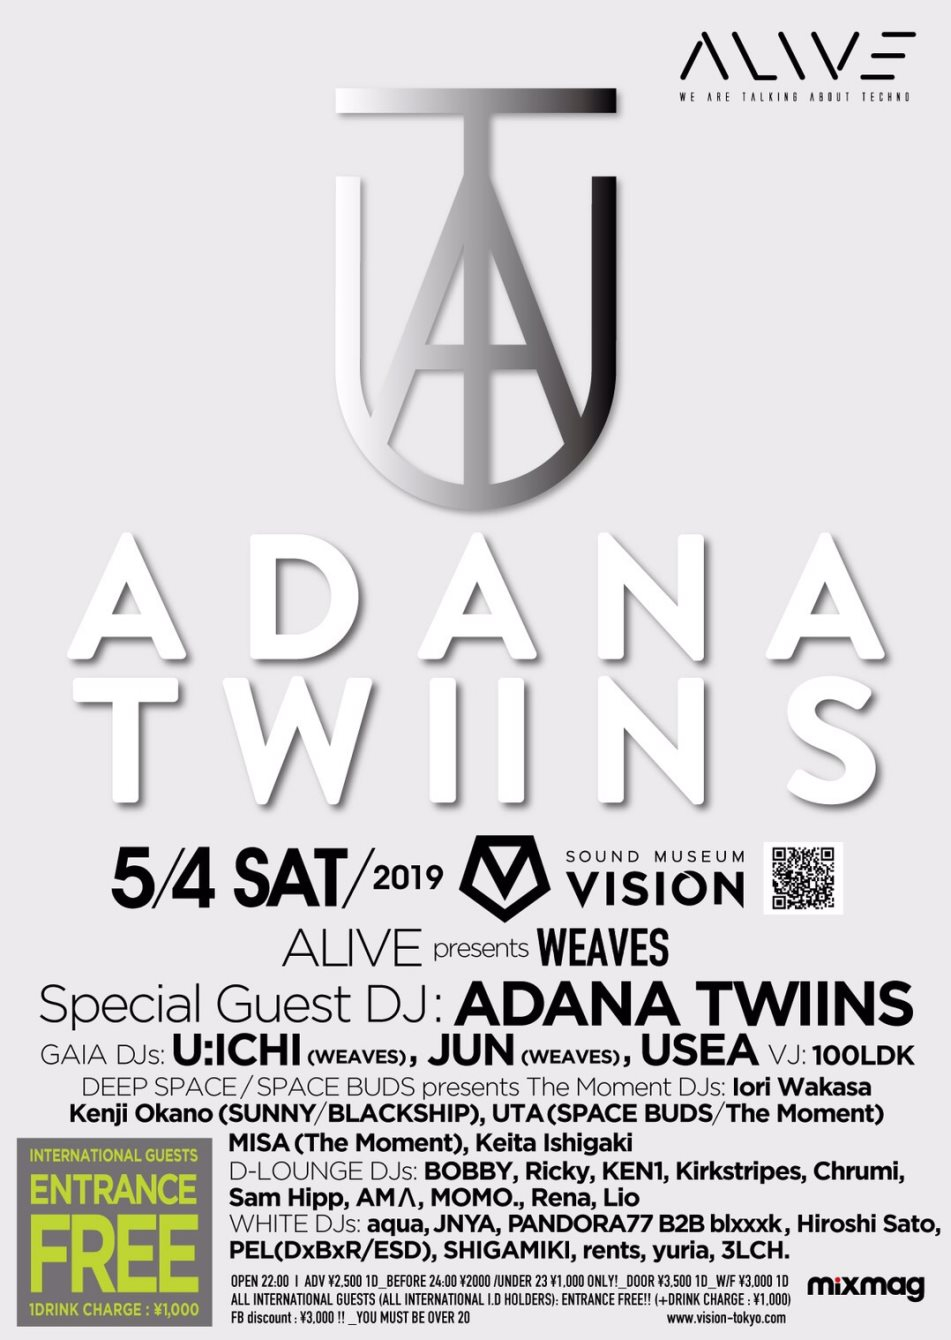 Alive presents Weaves Feat. Adana Twins - Flyer front